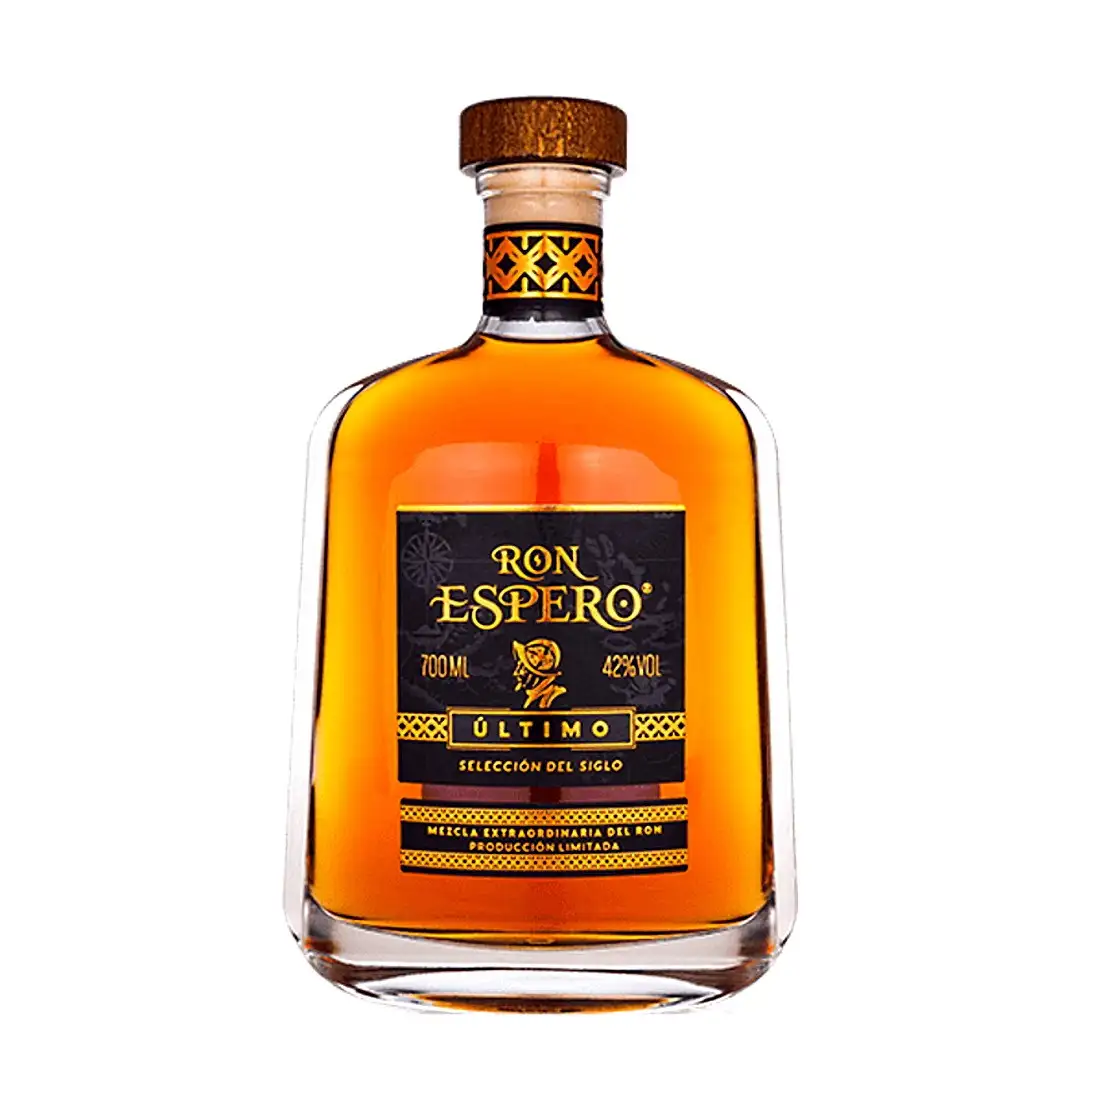 Image of the front of the bottle of the rum Ron Espero Reserva Extra Ultimo